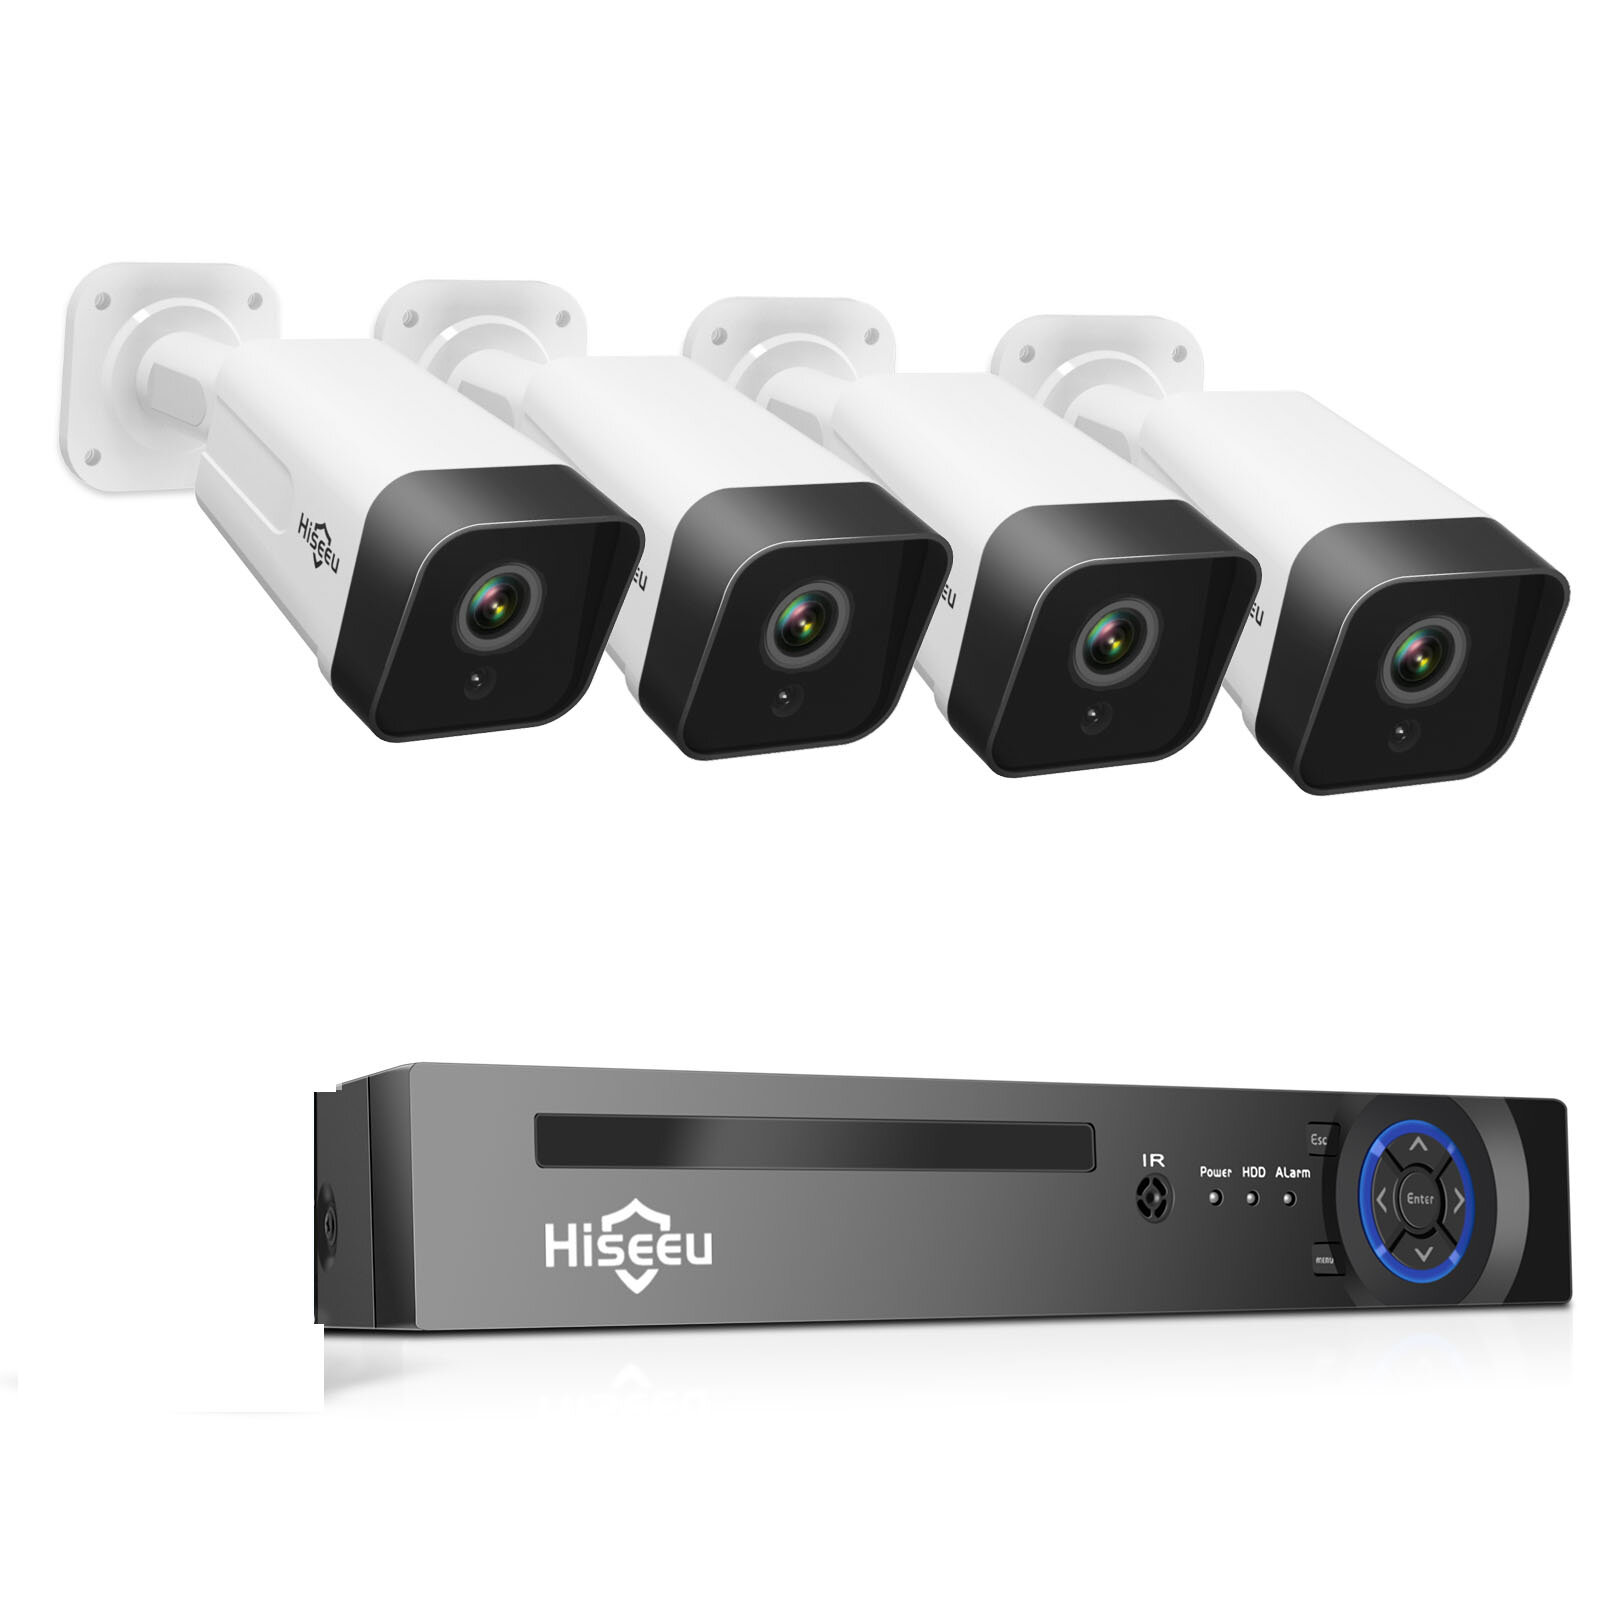 Hiseeu 4Pcs POE H.265+ Security IP Cameras 8CH 5MP NVR Camera System Support Audio Night Vision 10m IP66 Waterproof Onvif